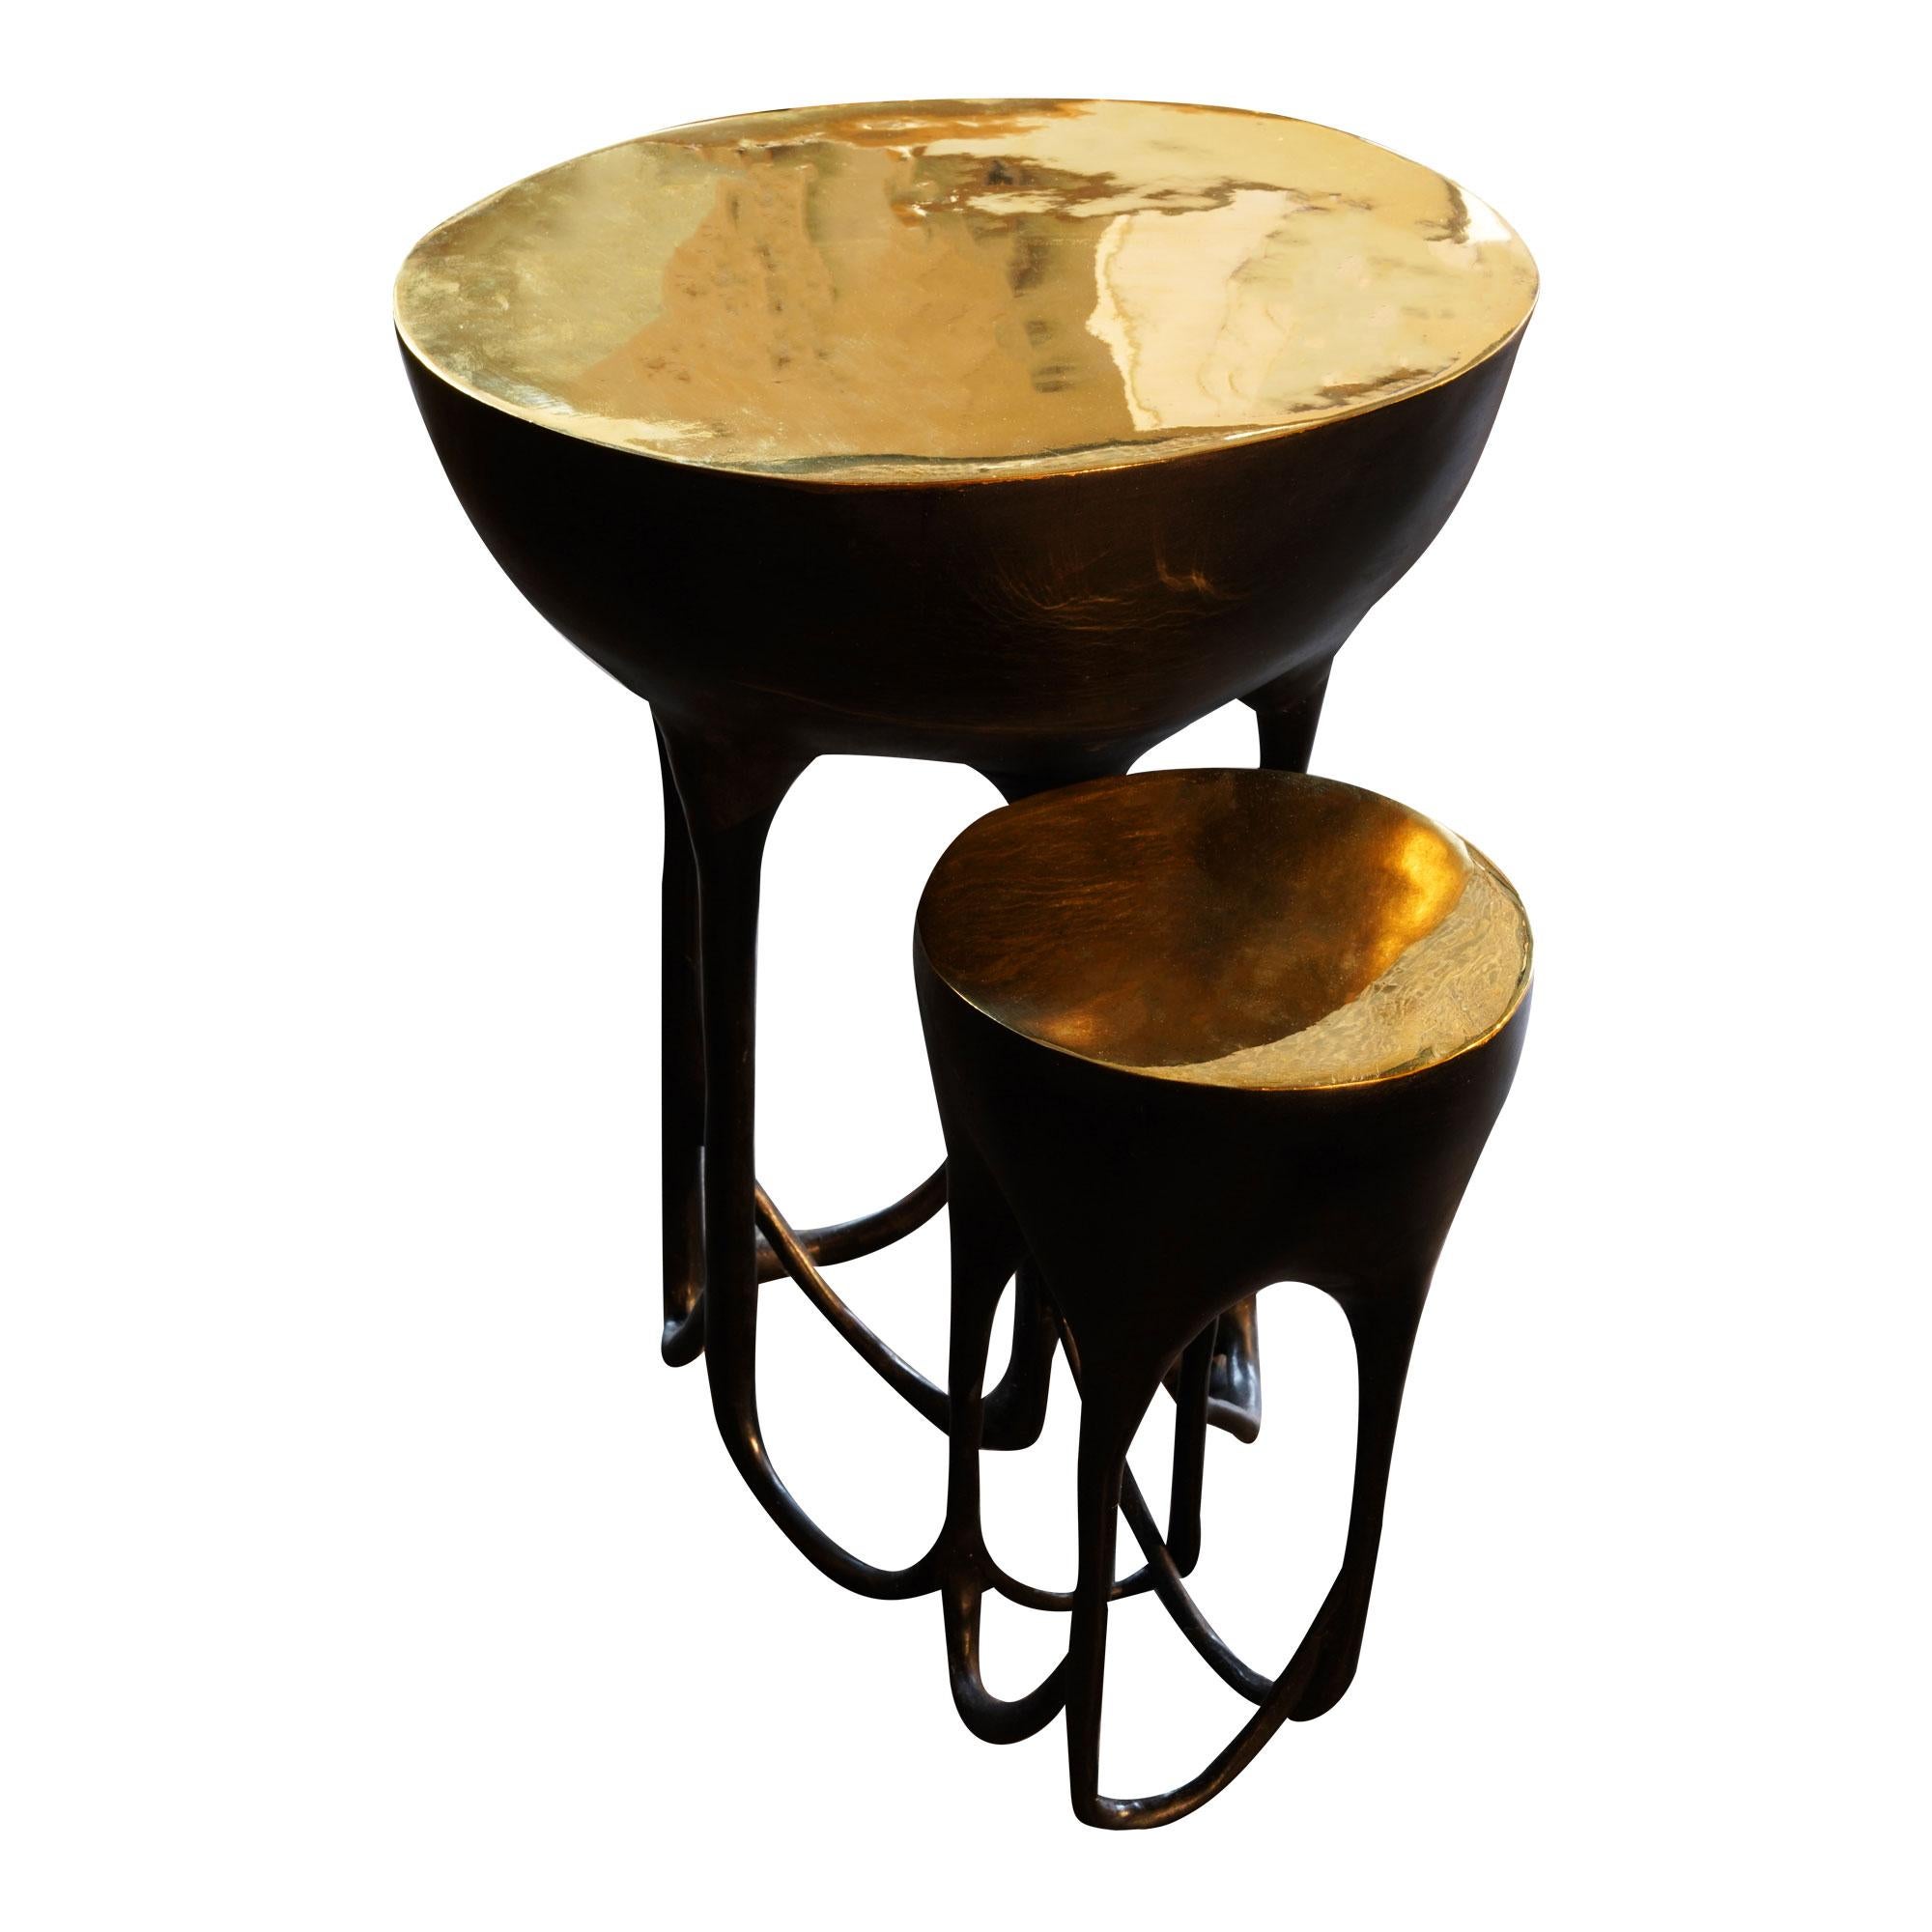 Elegant and intricate, this side table is made of polished and blackened bronze.

Can be customized.  The larger part of the table is 17